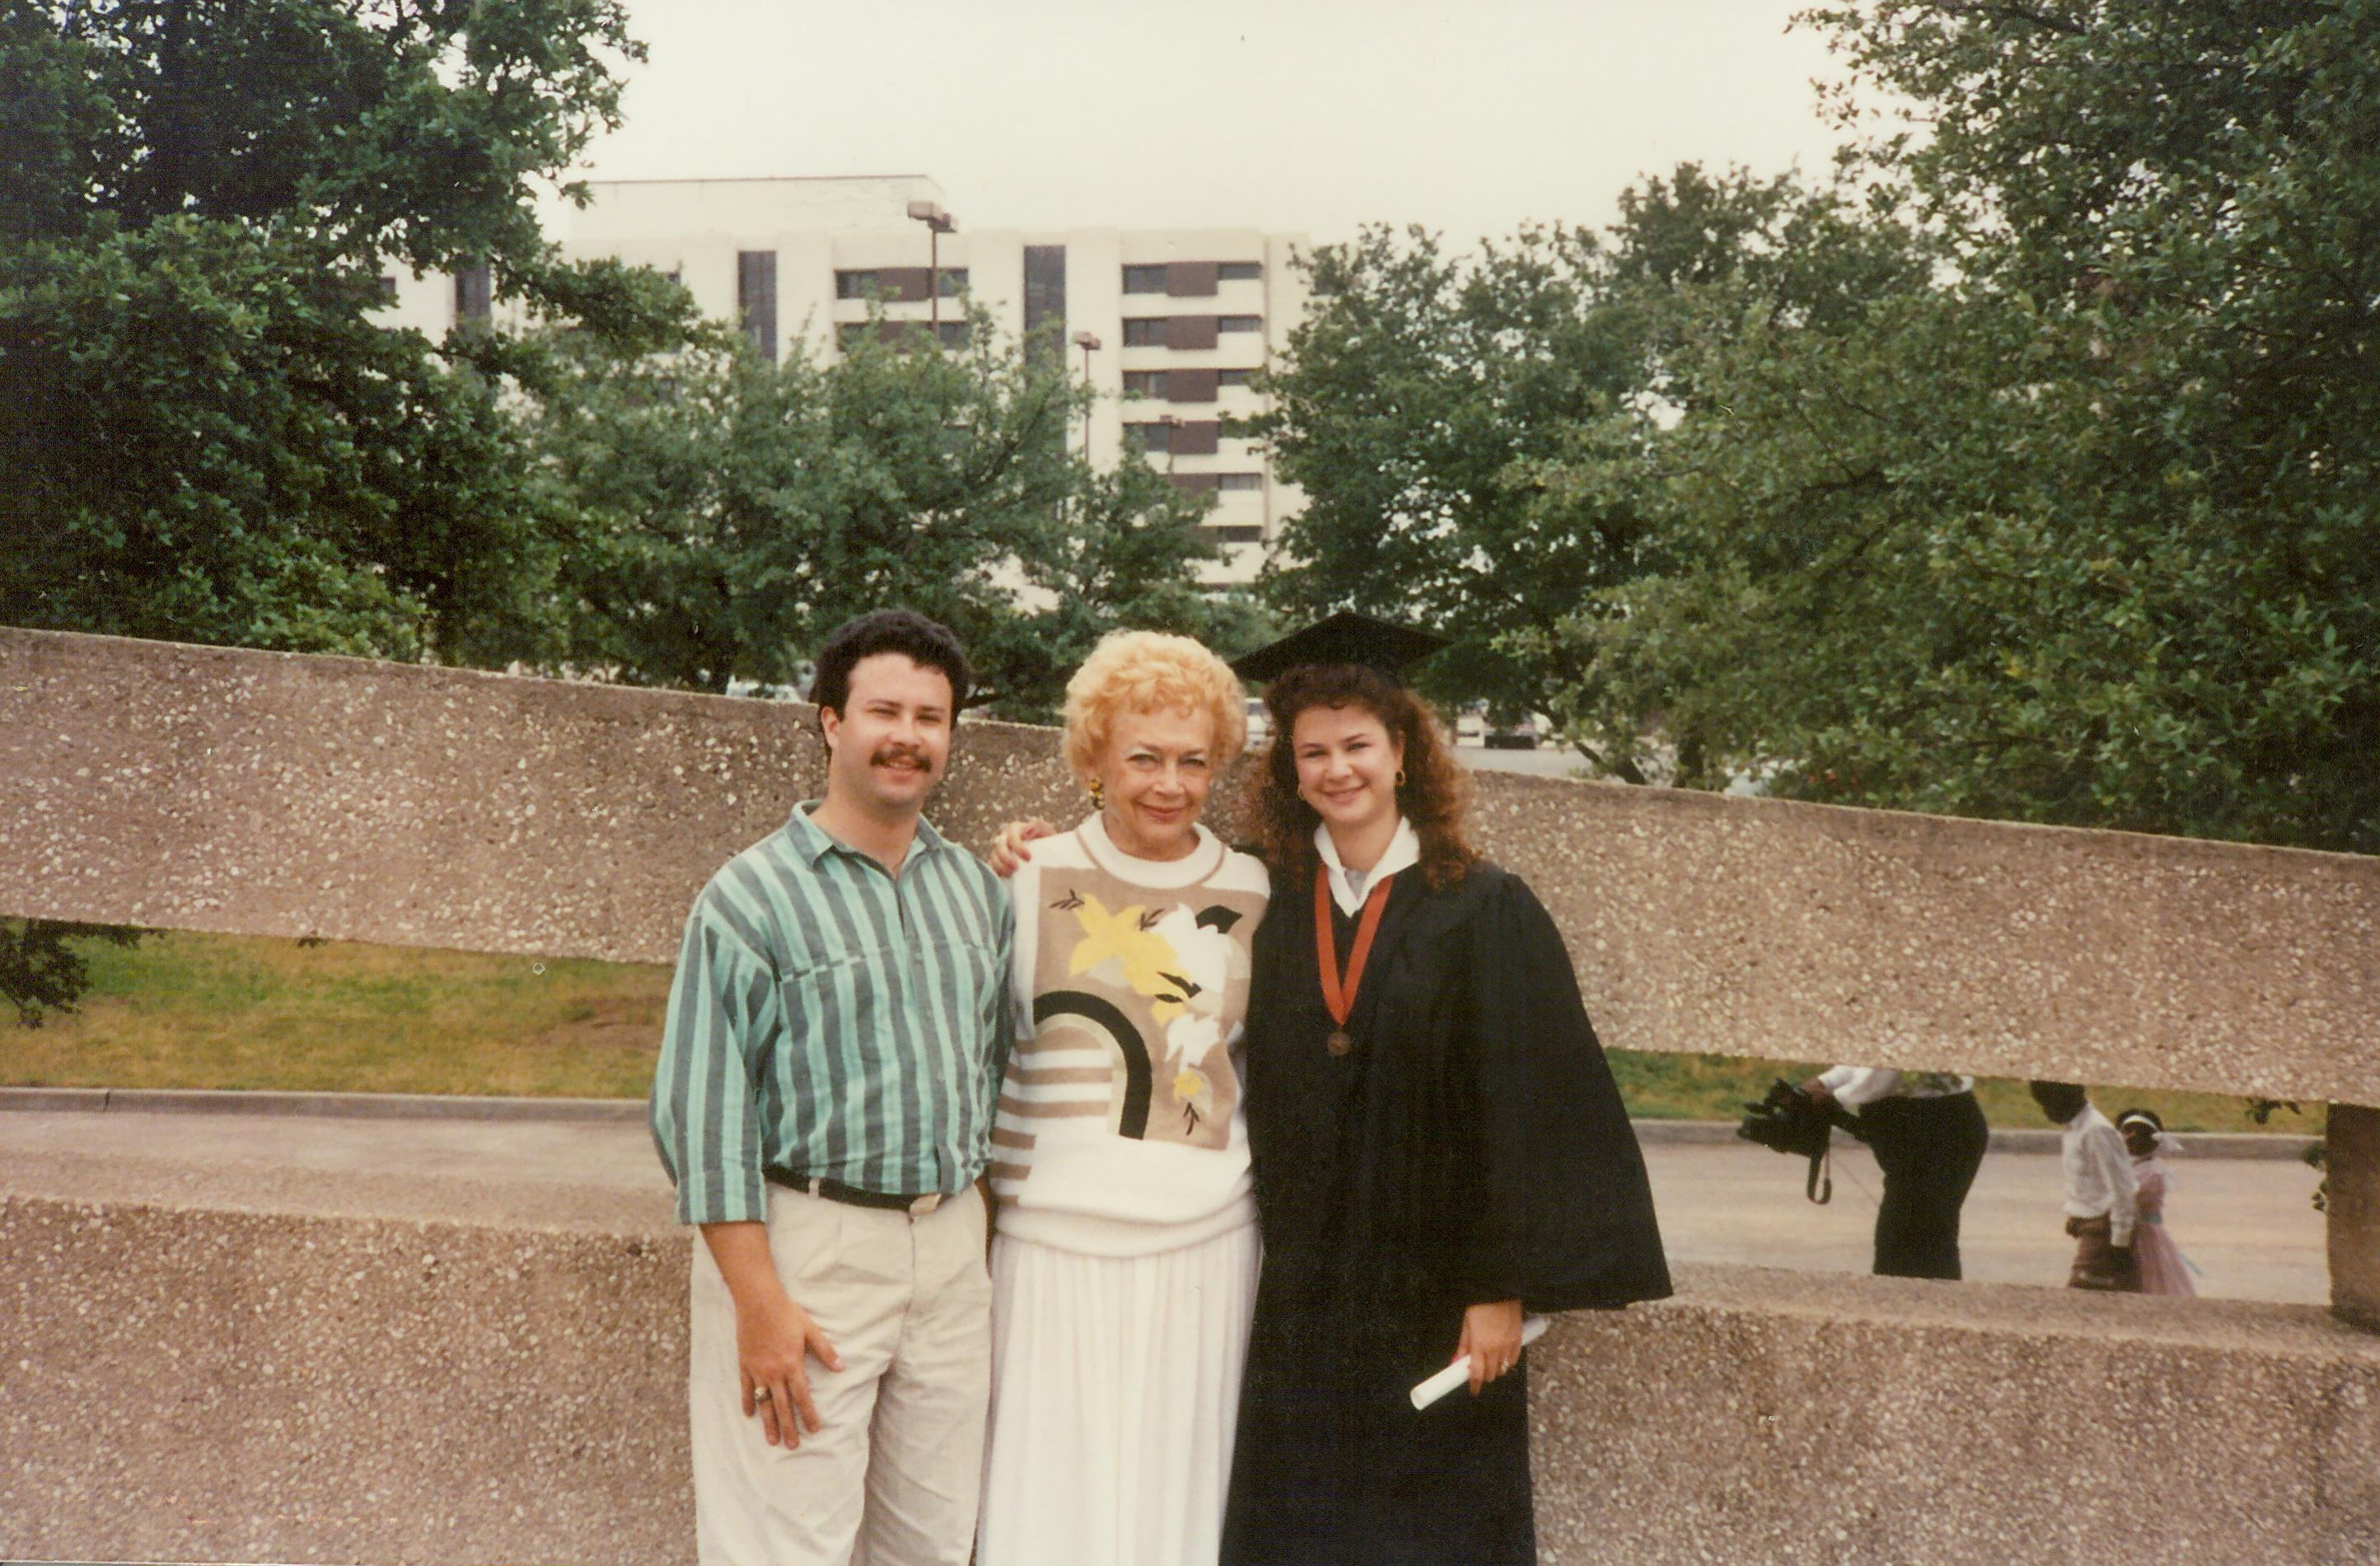 Three individuals posing outside, one in graduation attire with a diploma